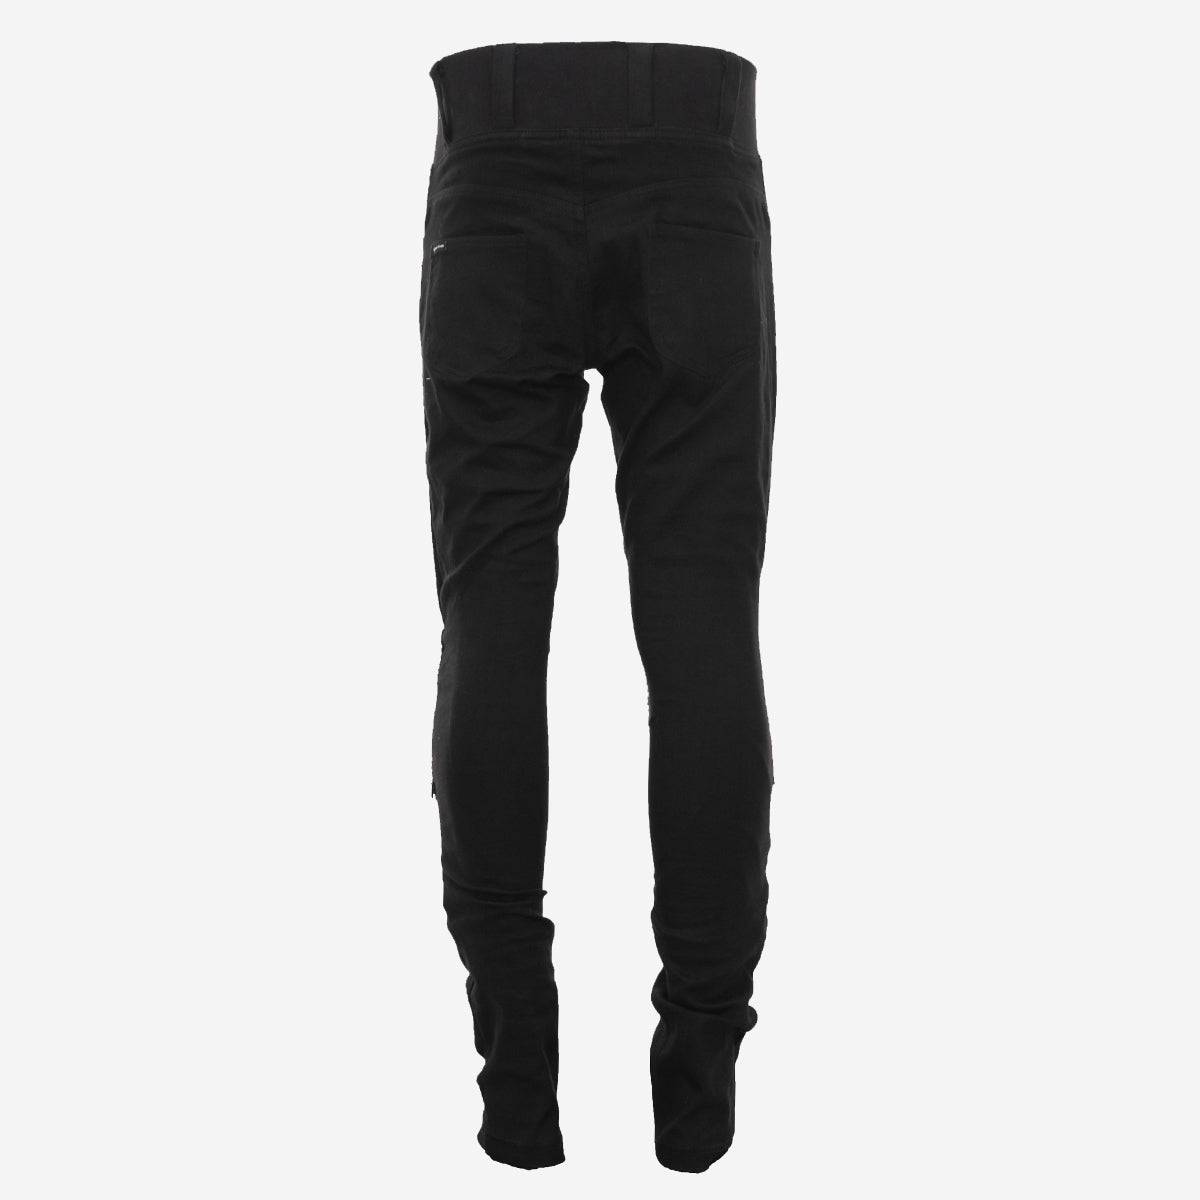 LYNX Unisex Motorcycle Safety Jeans